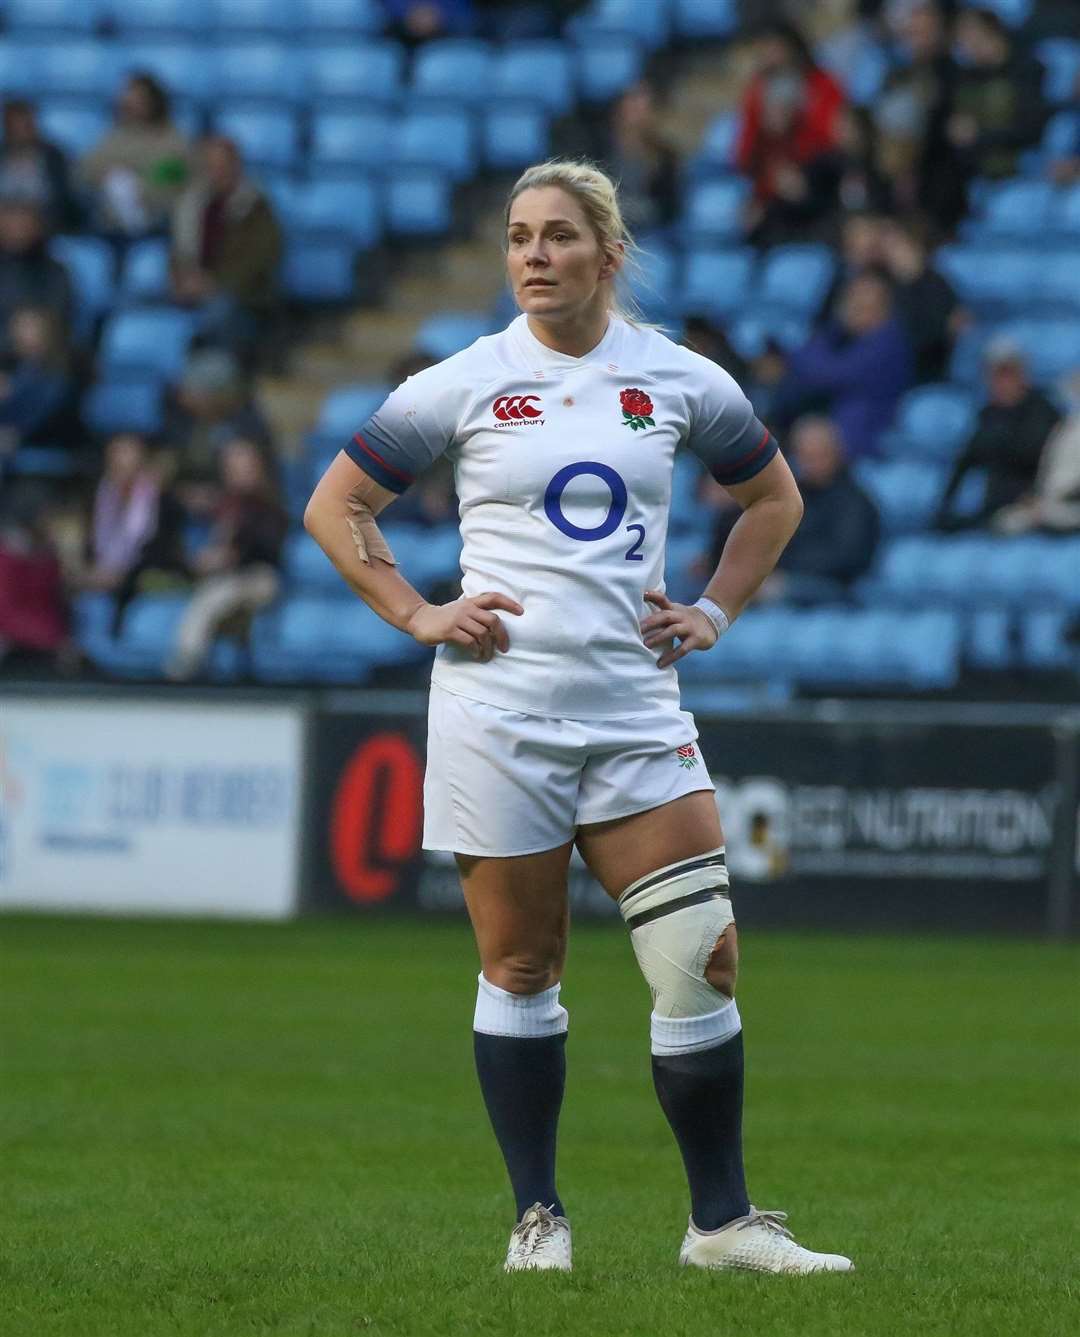 Medway's Rachael Burford playing for England in the Six Nations at the Ricoh Arena Picture: Paul Donovan